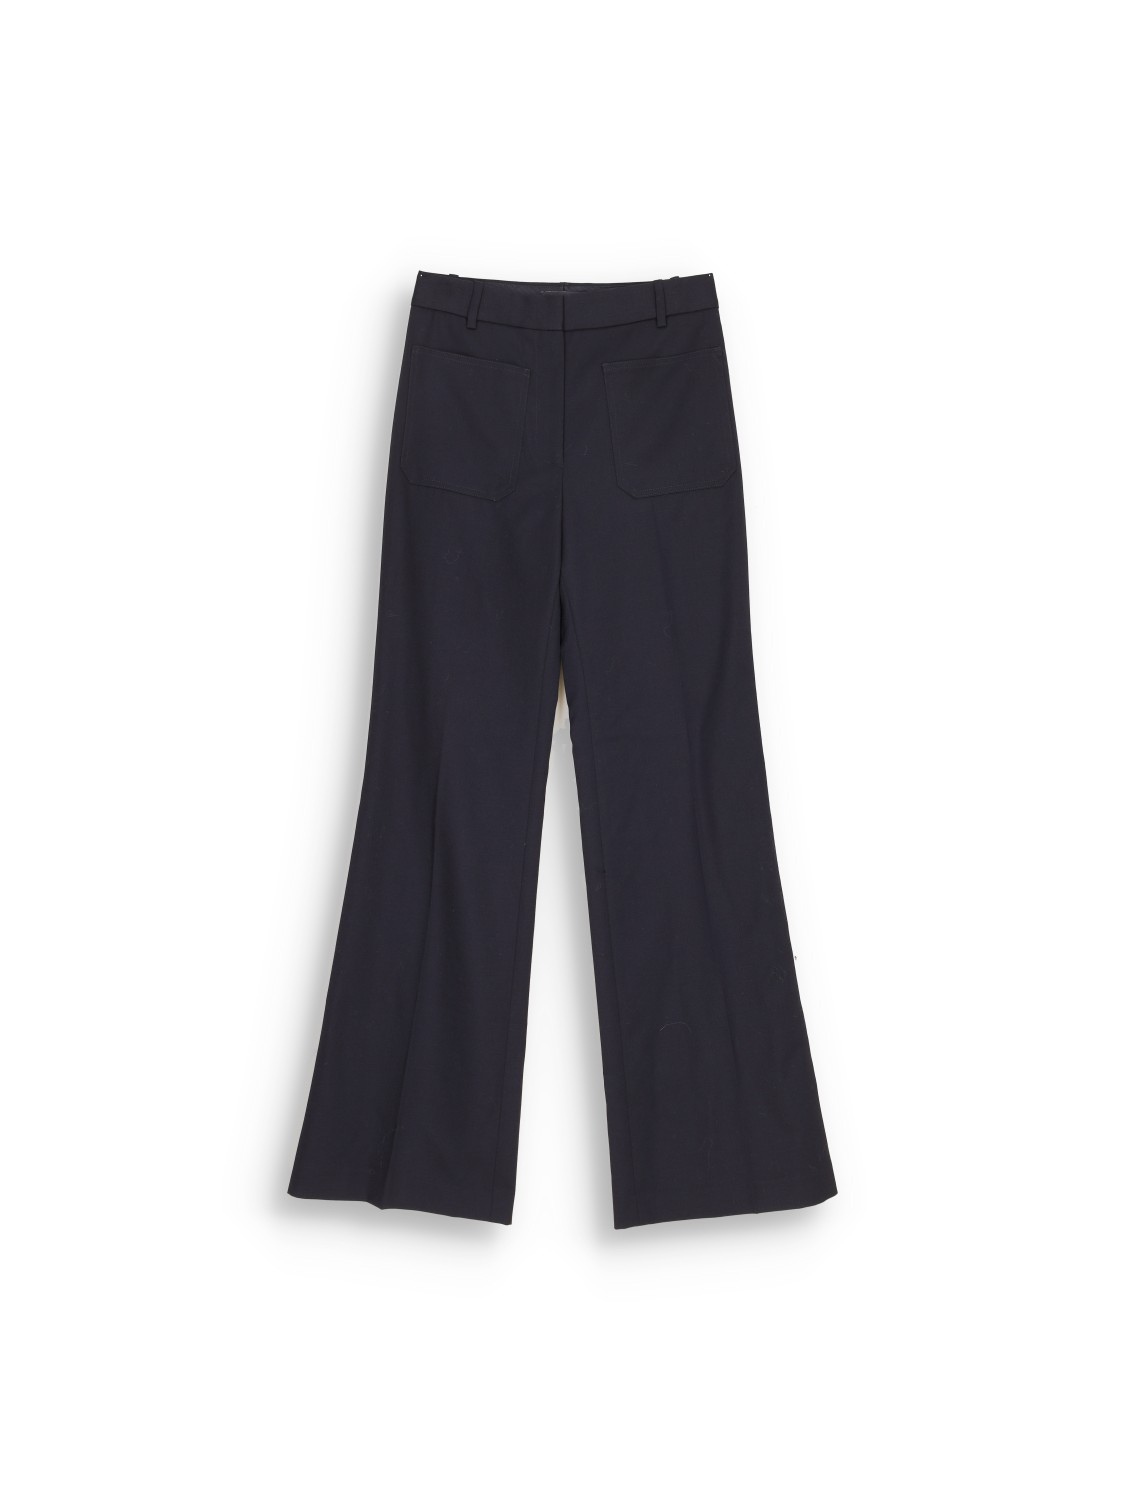 Christophe - Pleated trousers made of virgin wool